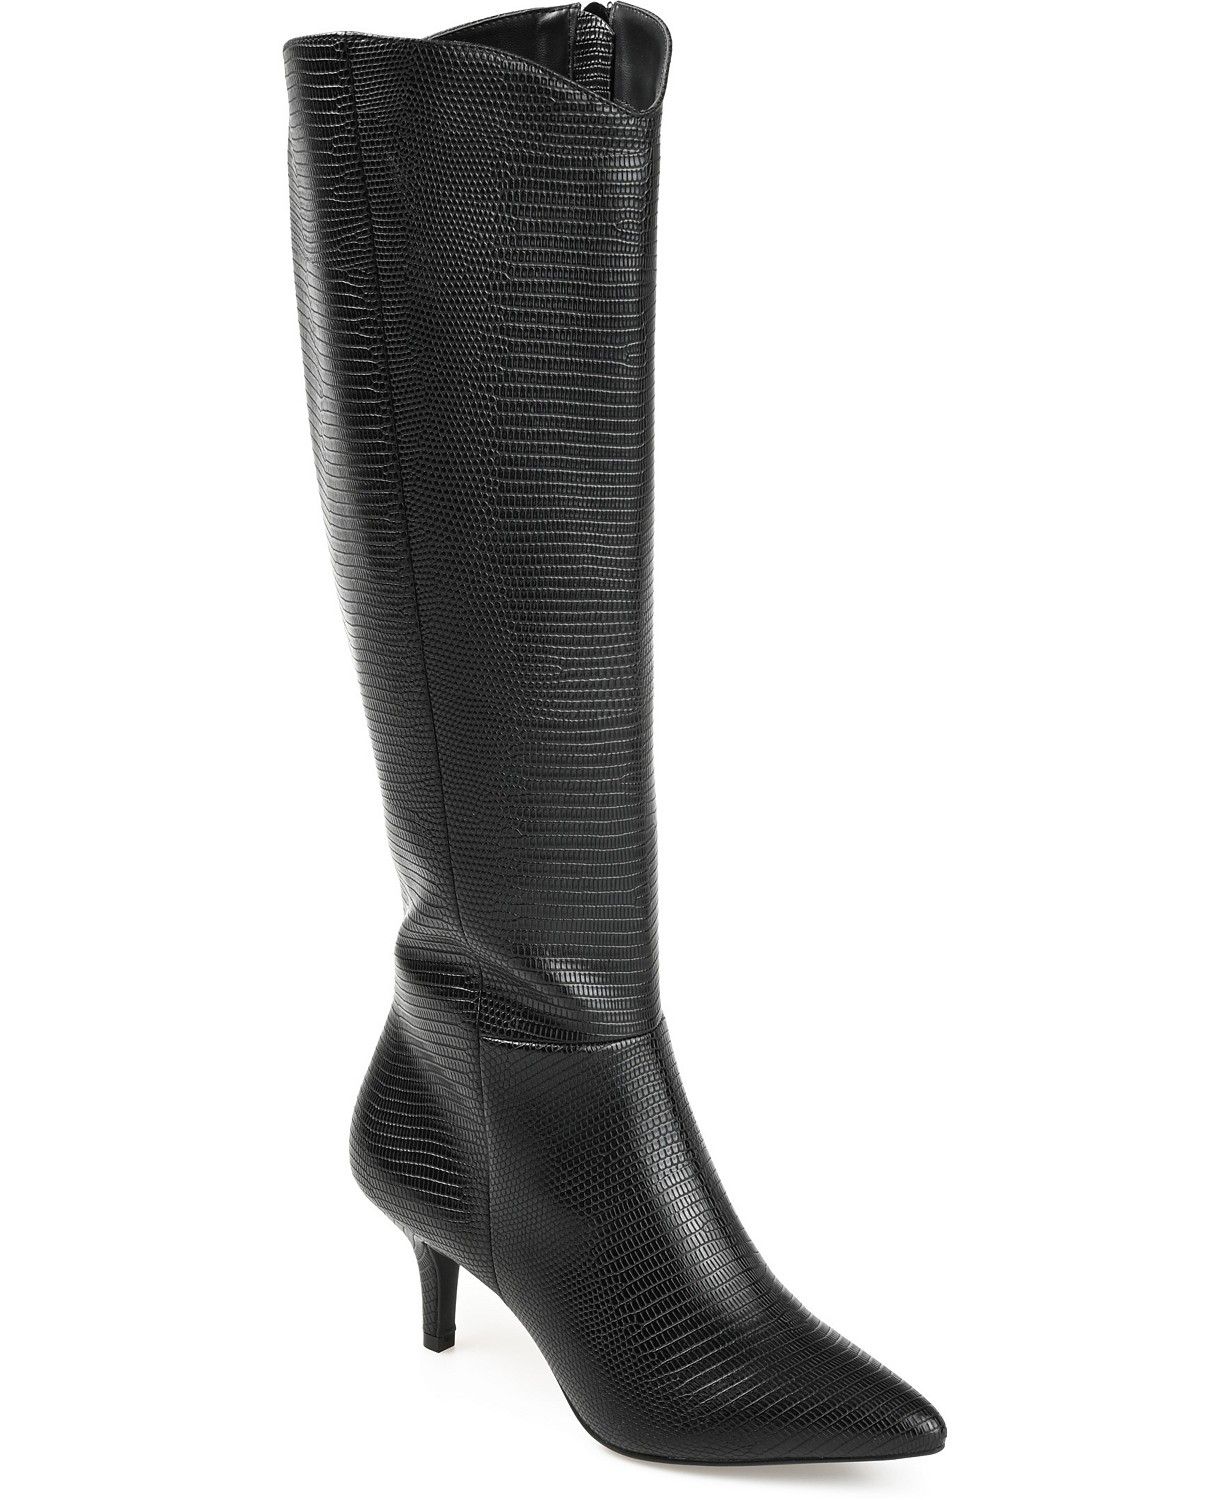 Journee Collection Women's Estrella Tall Boots & Reviews - Boots - Shoes - Macy's | Macys (US)